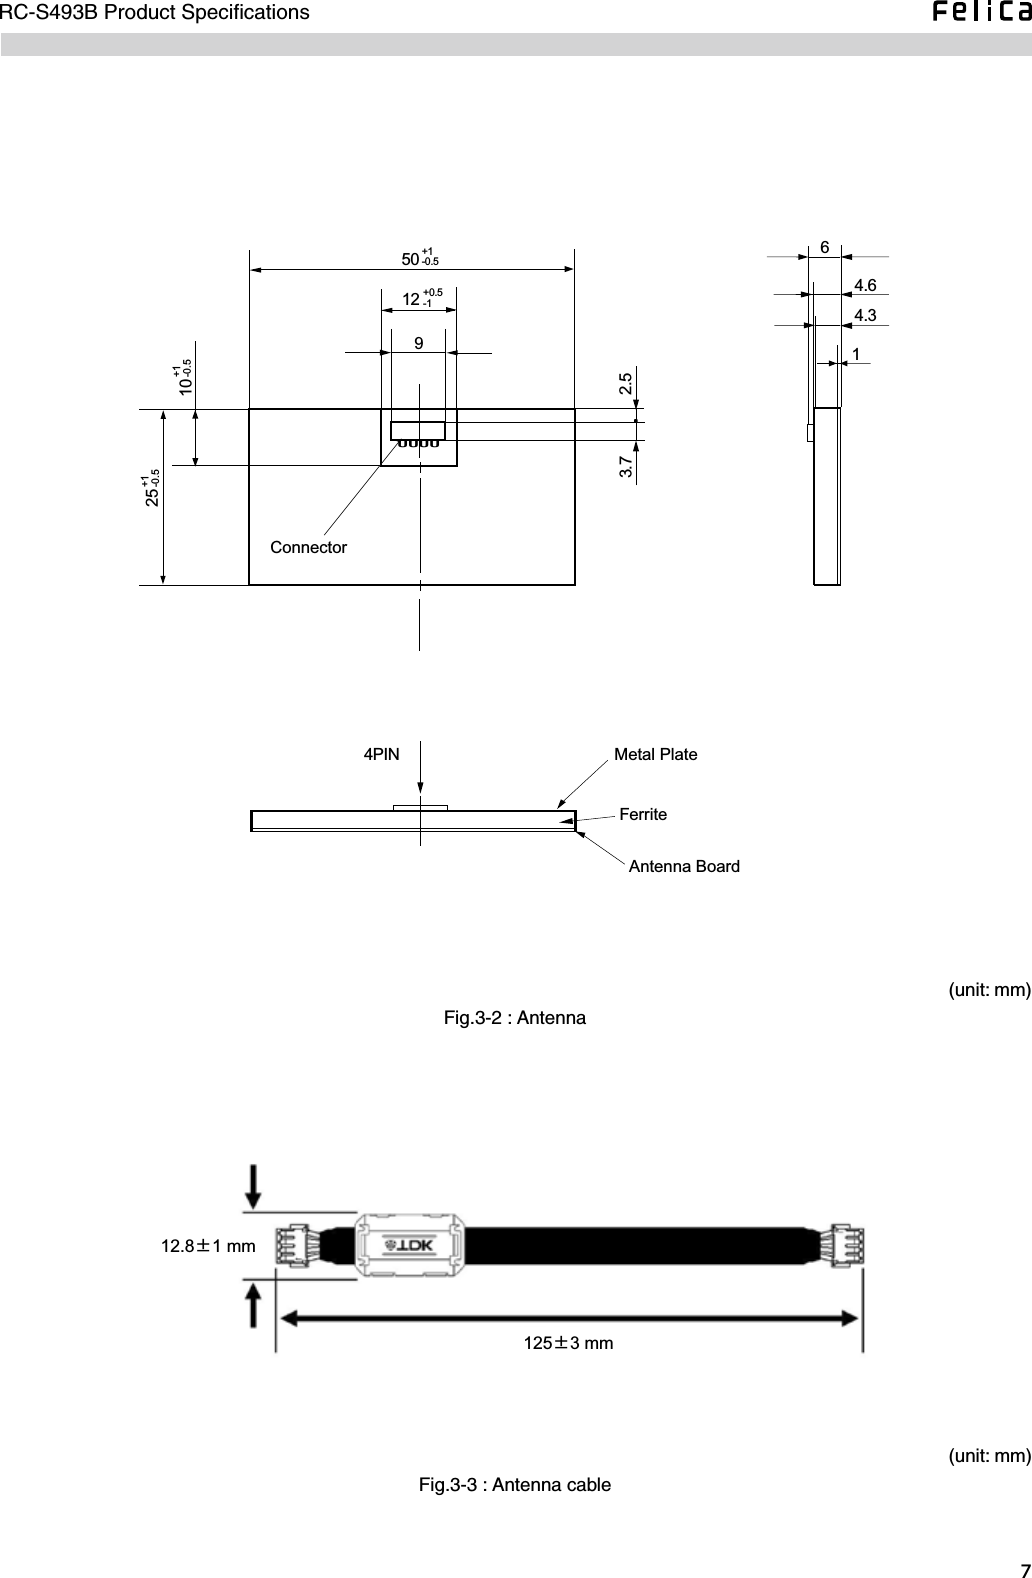 RC-S493B Product Speciﬁcations(unit: mm)Fig.3-2 : AntennaUUUU9125010253.7 2.54.64.314PIN・Antenna Board6ConnectorMetal PlateFerrite+1-0.5+0.5-1+1-0.5+1-0.5(unit: mm)Fig.3-3 : Antenna cable125±3 mm12.8±1 mm